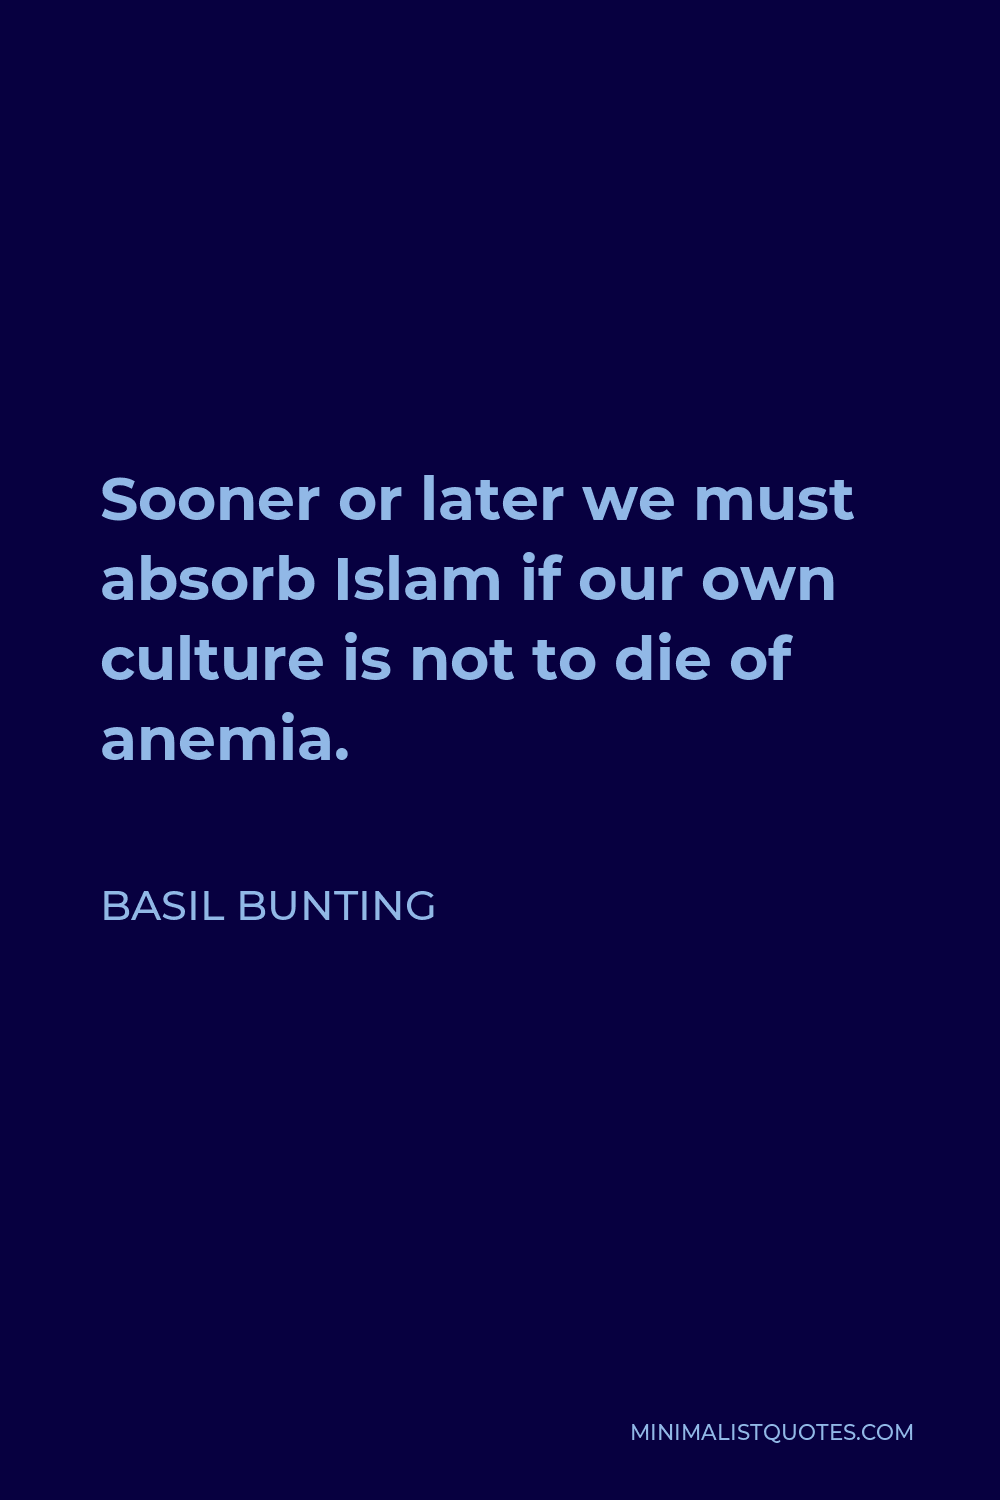 Basil Bunting Quote - Sooner or later we must absorb Islam if our own culture is not to die of anemia.